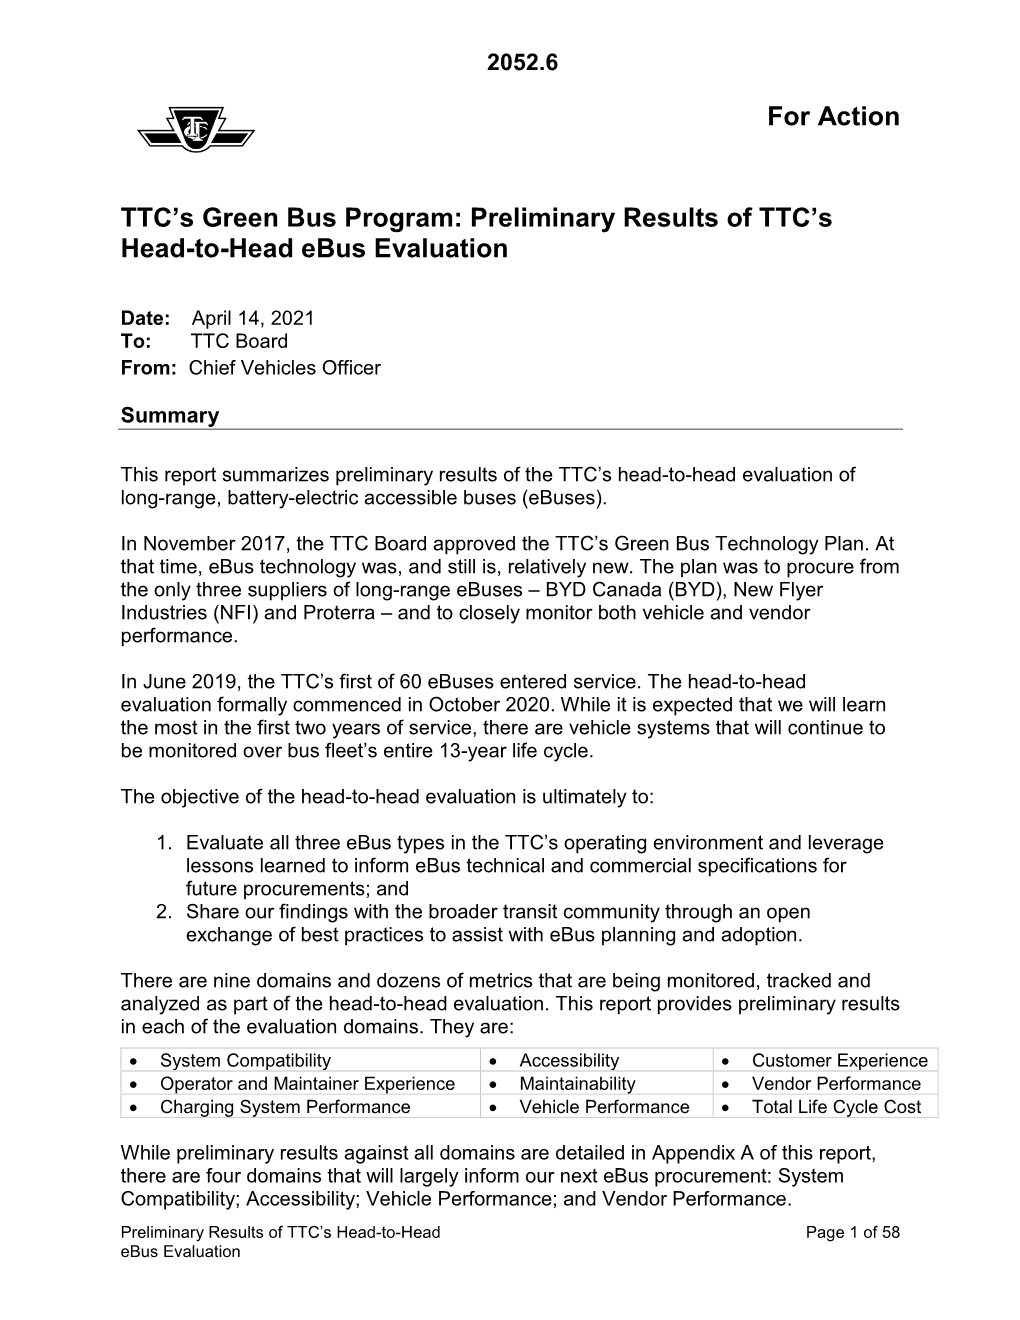 Preliminary Results of TTC's Head-To-Head Ebus Evaluation